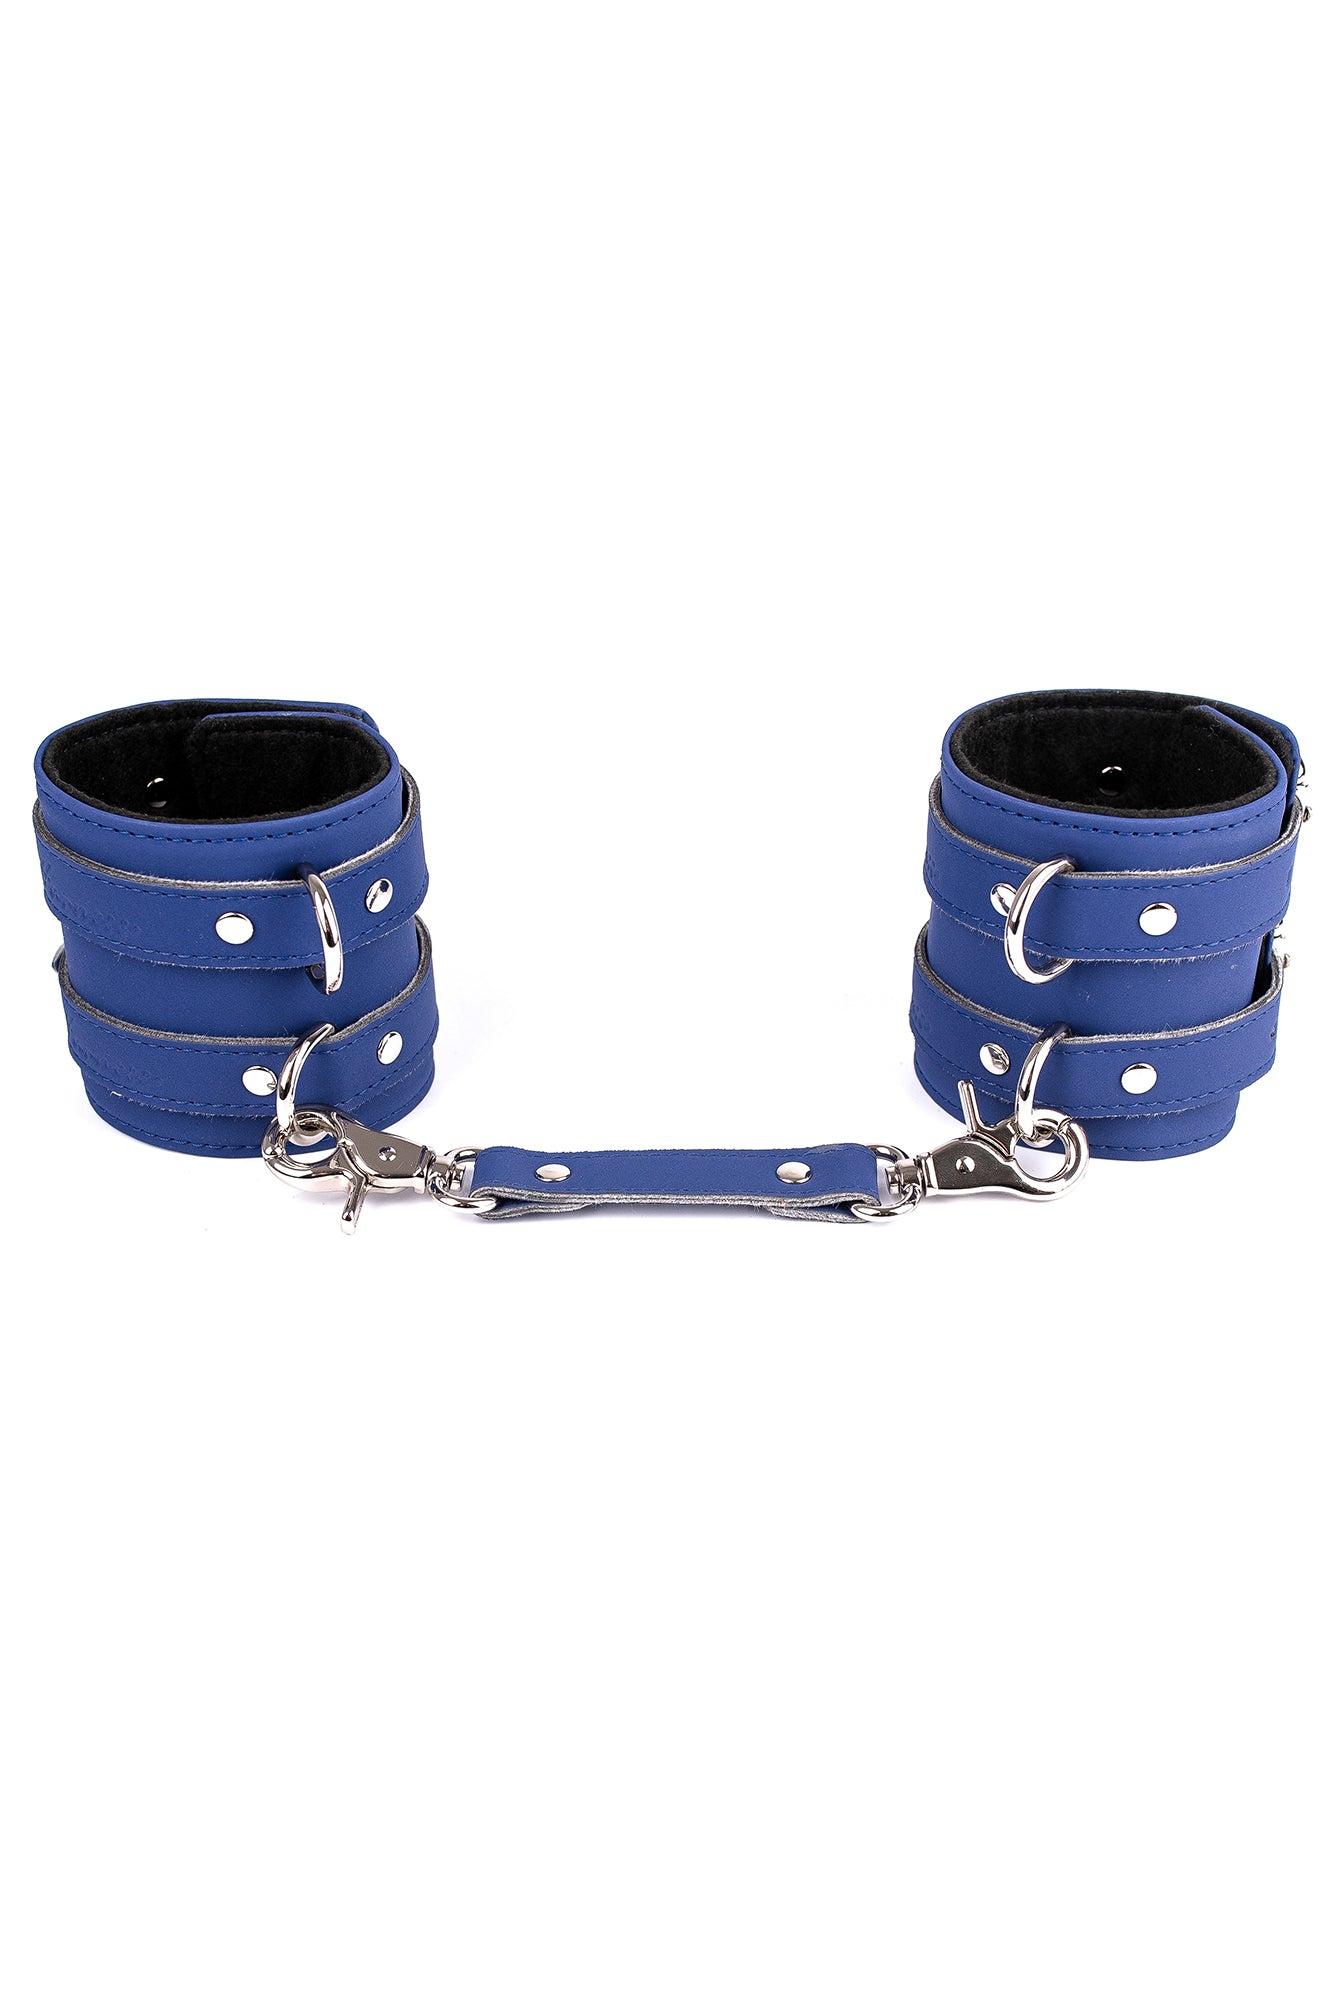 Vegan Leather Wide Handcuffs, Ankle cuffs with standard connector